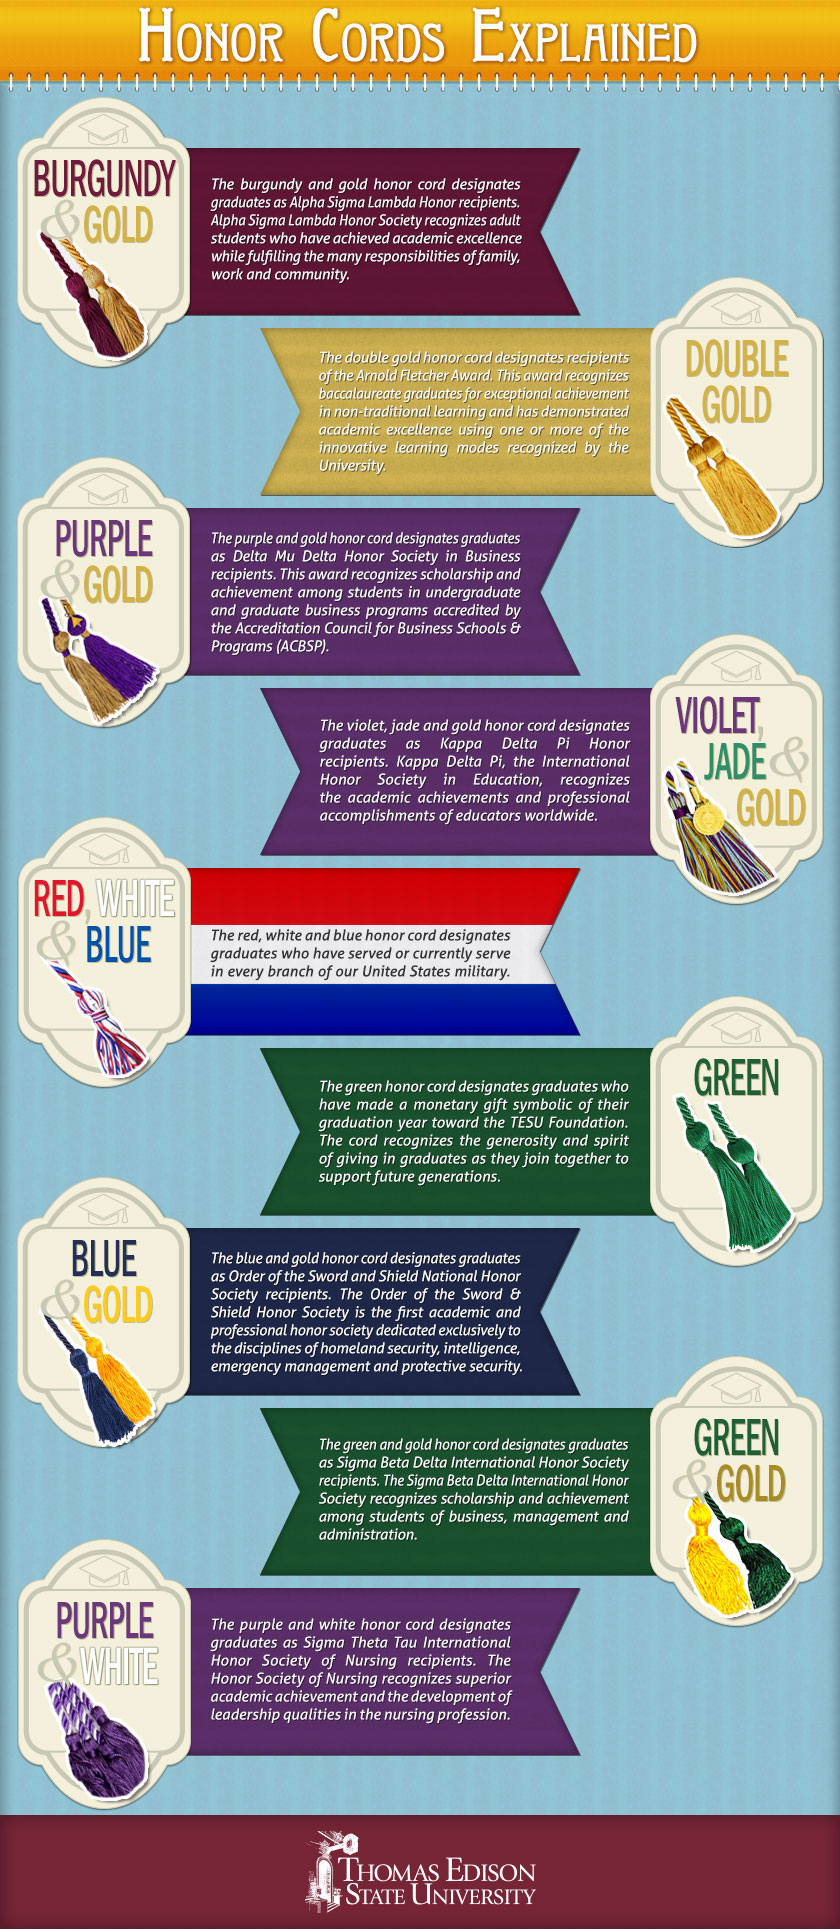 Honor cords explained (infographic)